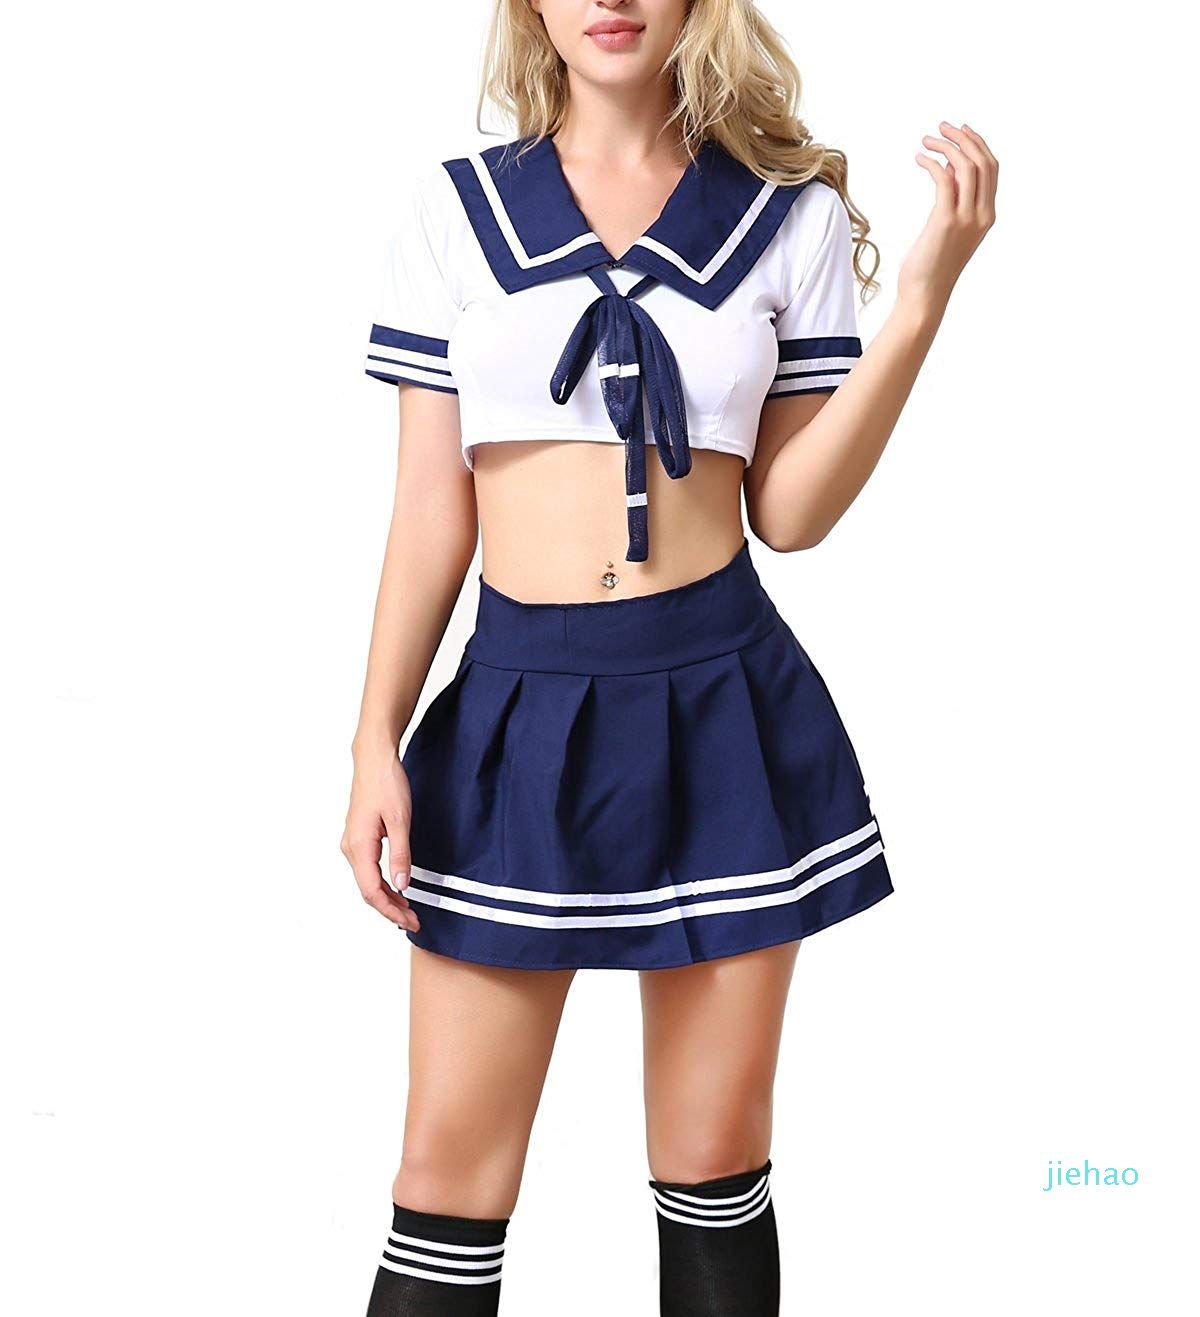 1200px x 1317px - 2021 Fashion Sexy Schoolgirl Outfit Lingerie School Girl Costume With Socks  From Jiehao, $21.46 | DHgate.Com